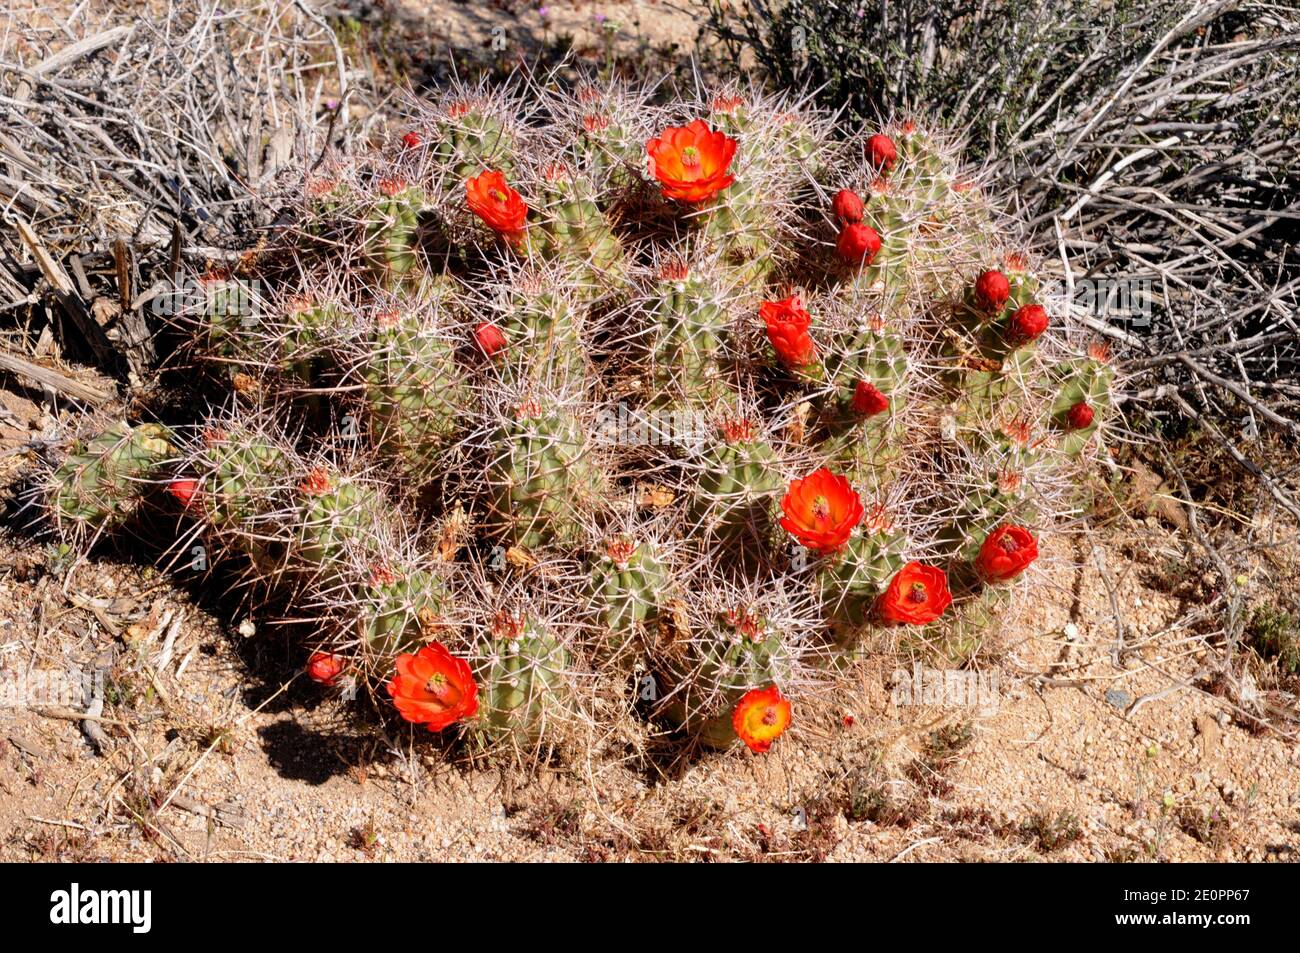 Kingcup cactus or Mojave mound cactus (Echinocereus triglochidiatus) is a cactus native to Southwestern USA and Northern Mexico. This photo was taken Stock Photo